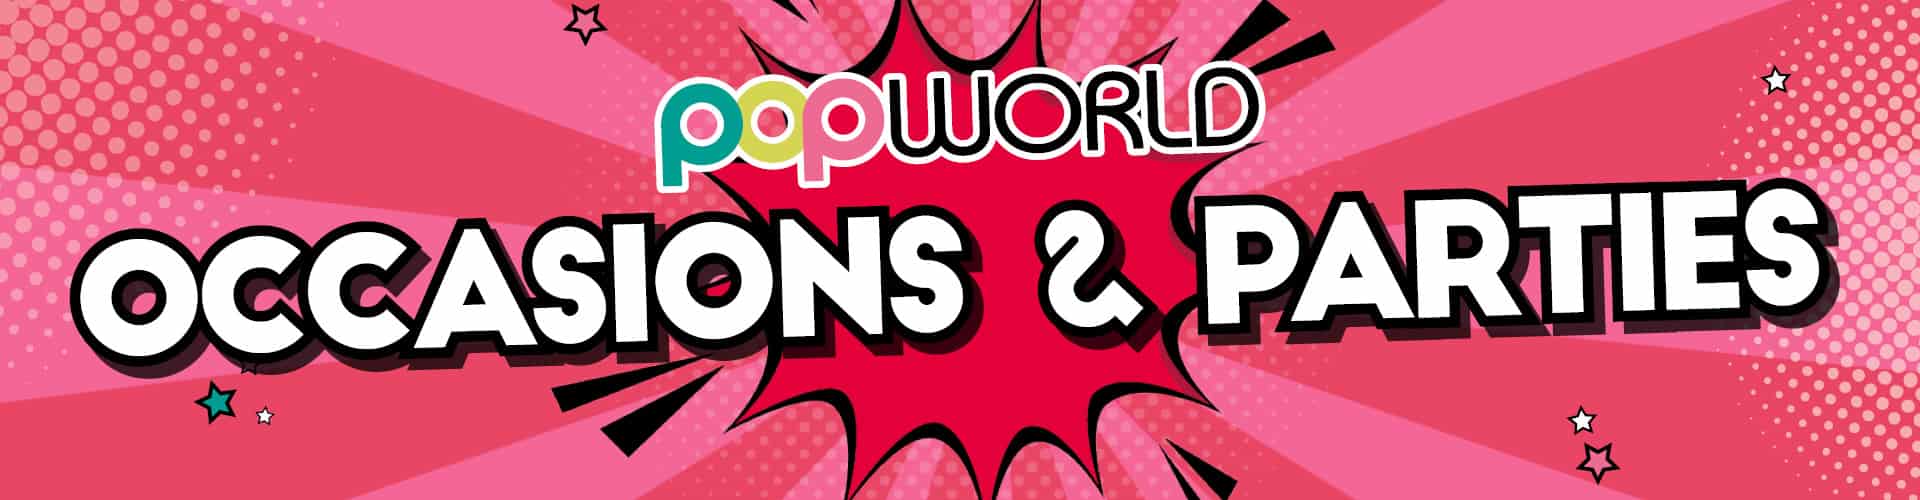 Occasions and Parties at Popworld & Zinc Weston-Super-Mare